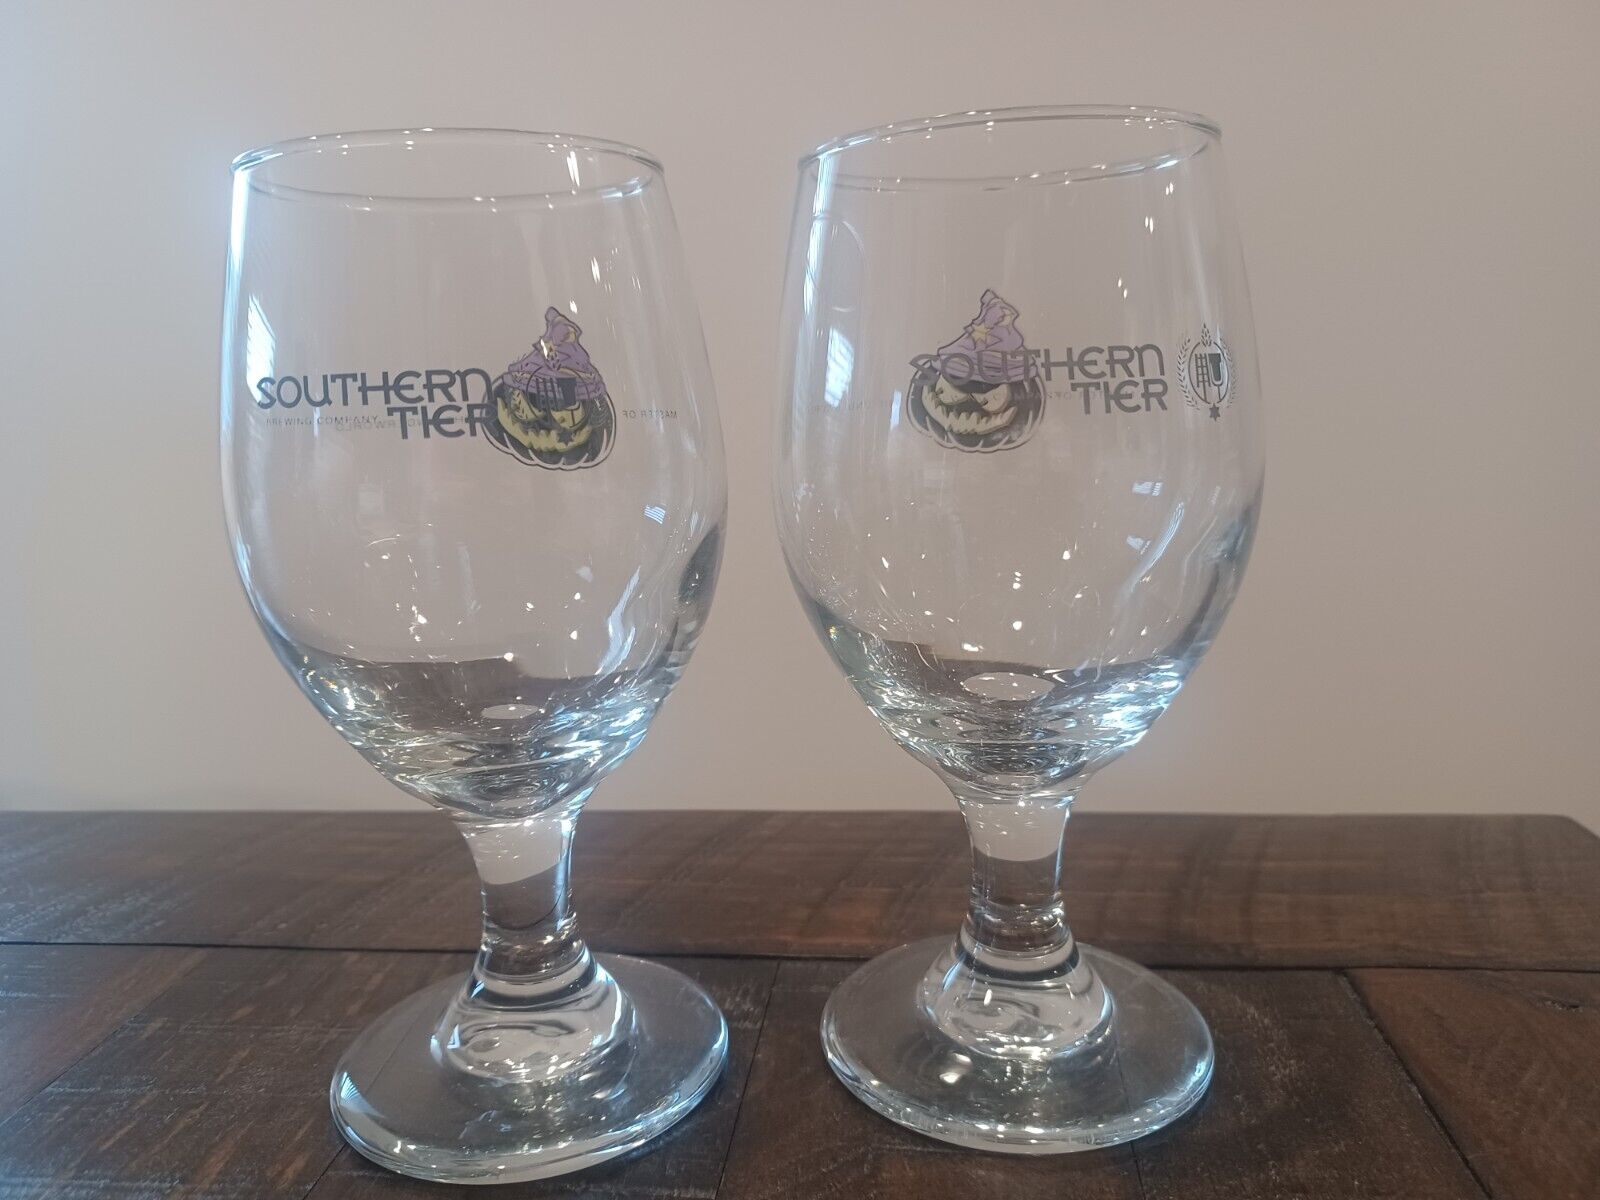 REDUCED 2 Southern Tier Brewing Co Master of the Underworld Craft Beer Glasses